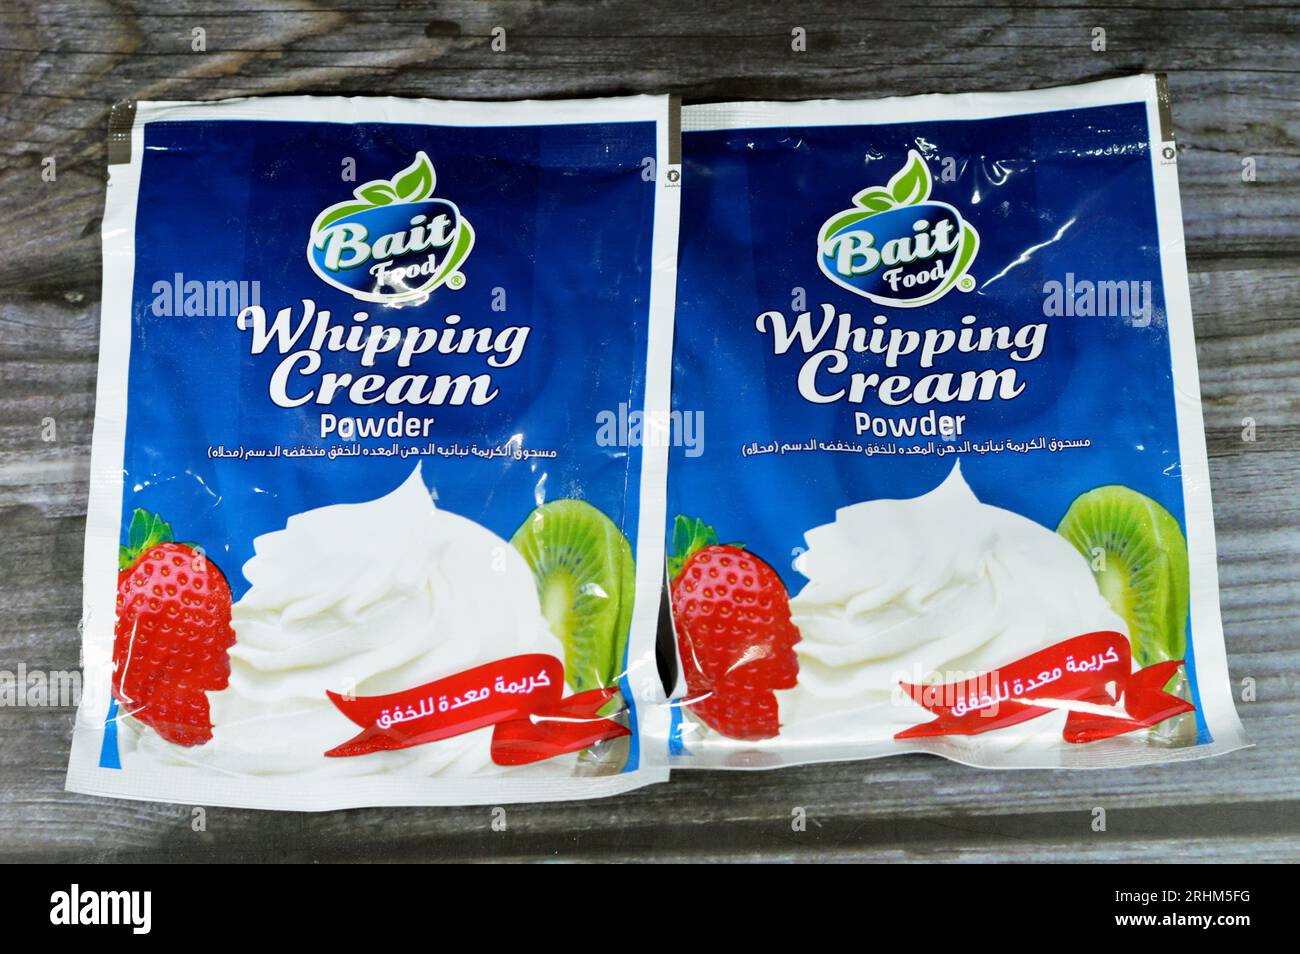 https://c8.alamy.com/comp/2RHM5FG/cairo-egypt-august-10-2023-whipping-cream-powder-from-bait-food-whipped-cream-is-heavy-double-cream-or-other-high-fat-cream-whipped-by-a-whisk-2RHM5FG.jpg